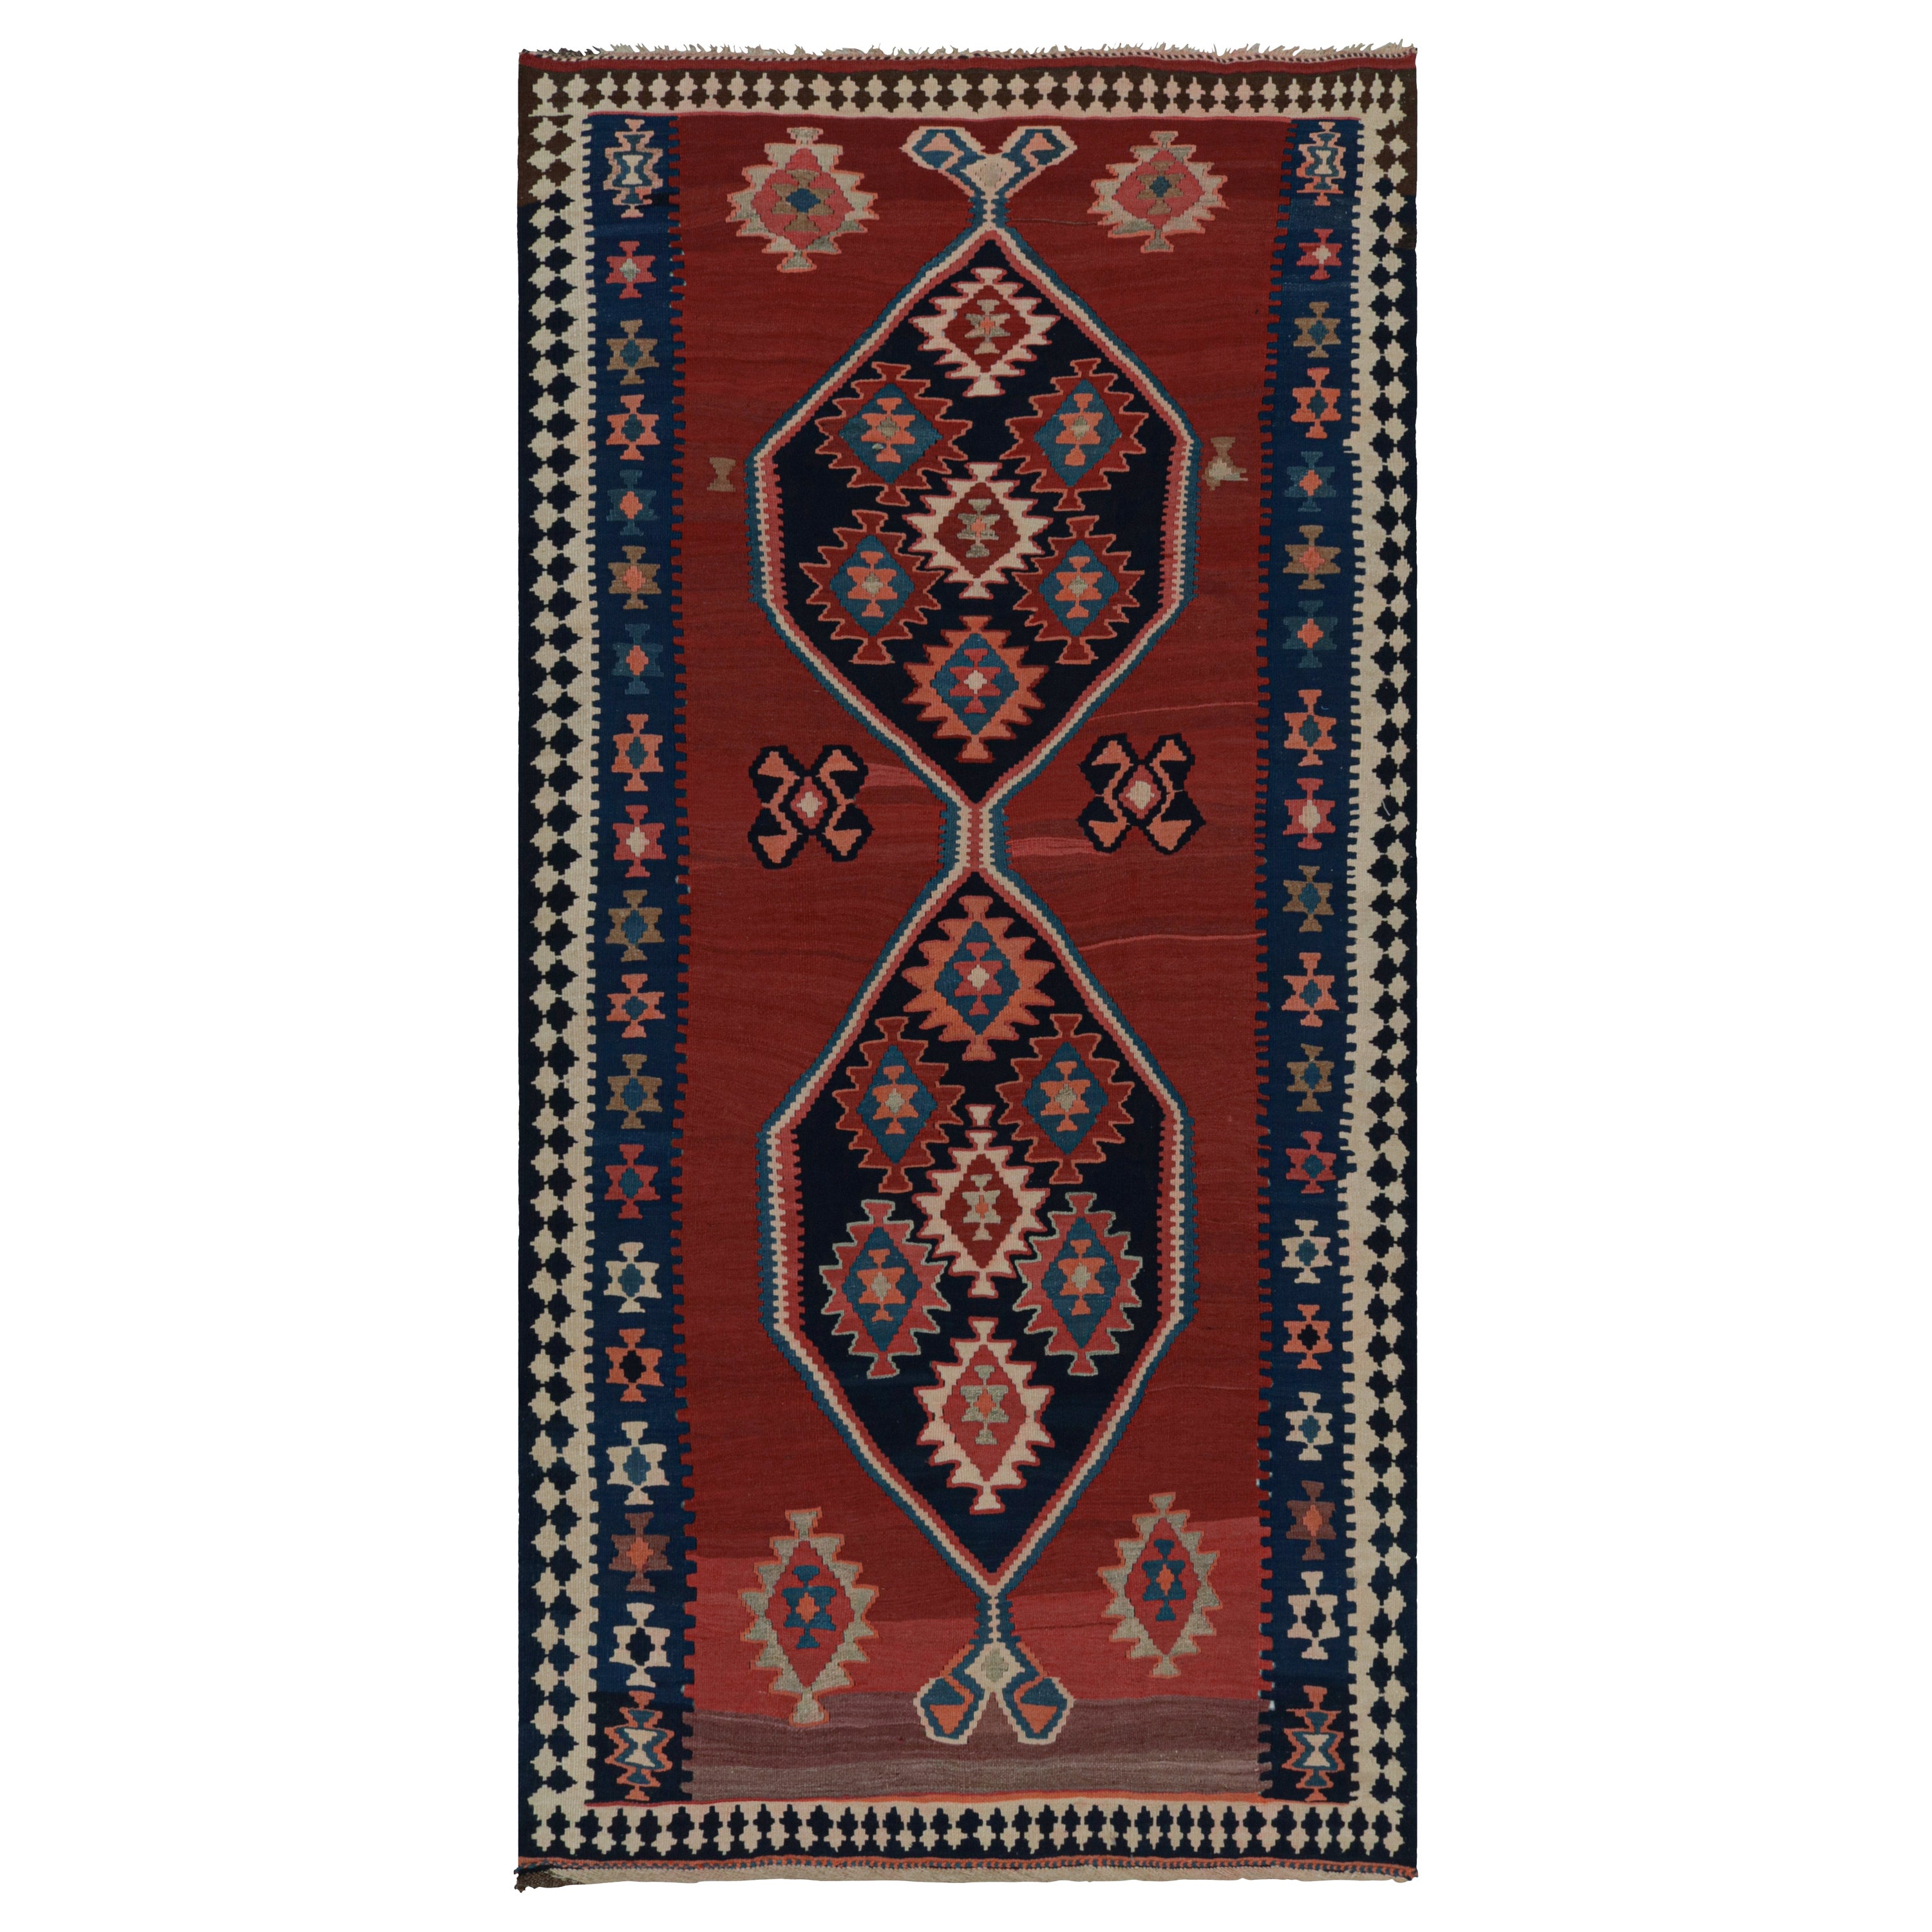 Vintage Afghani Tribal Kilim rug, with Open Field and Medallion from Rug & Kilim